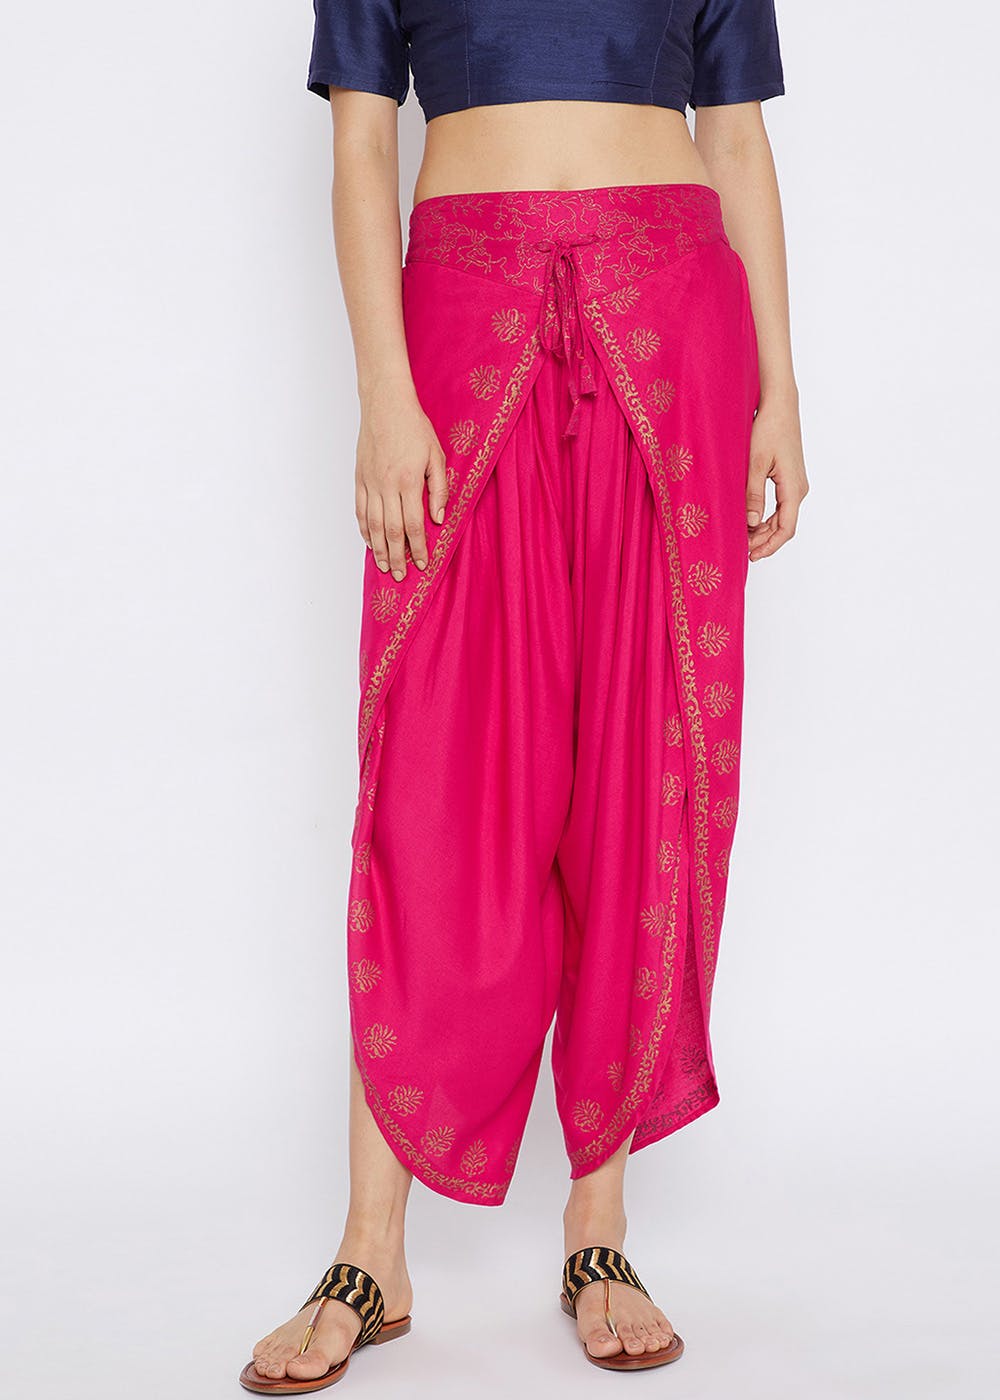 Multicolor Casual Wear Dhoti Pants Age Adult Size 40 Inch Length